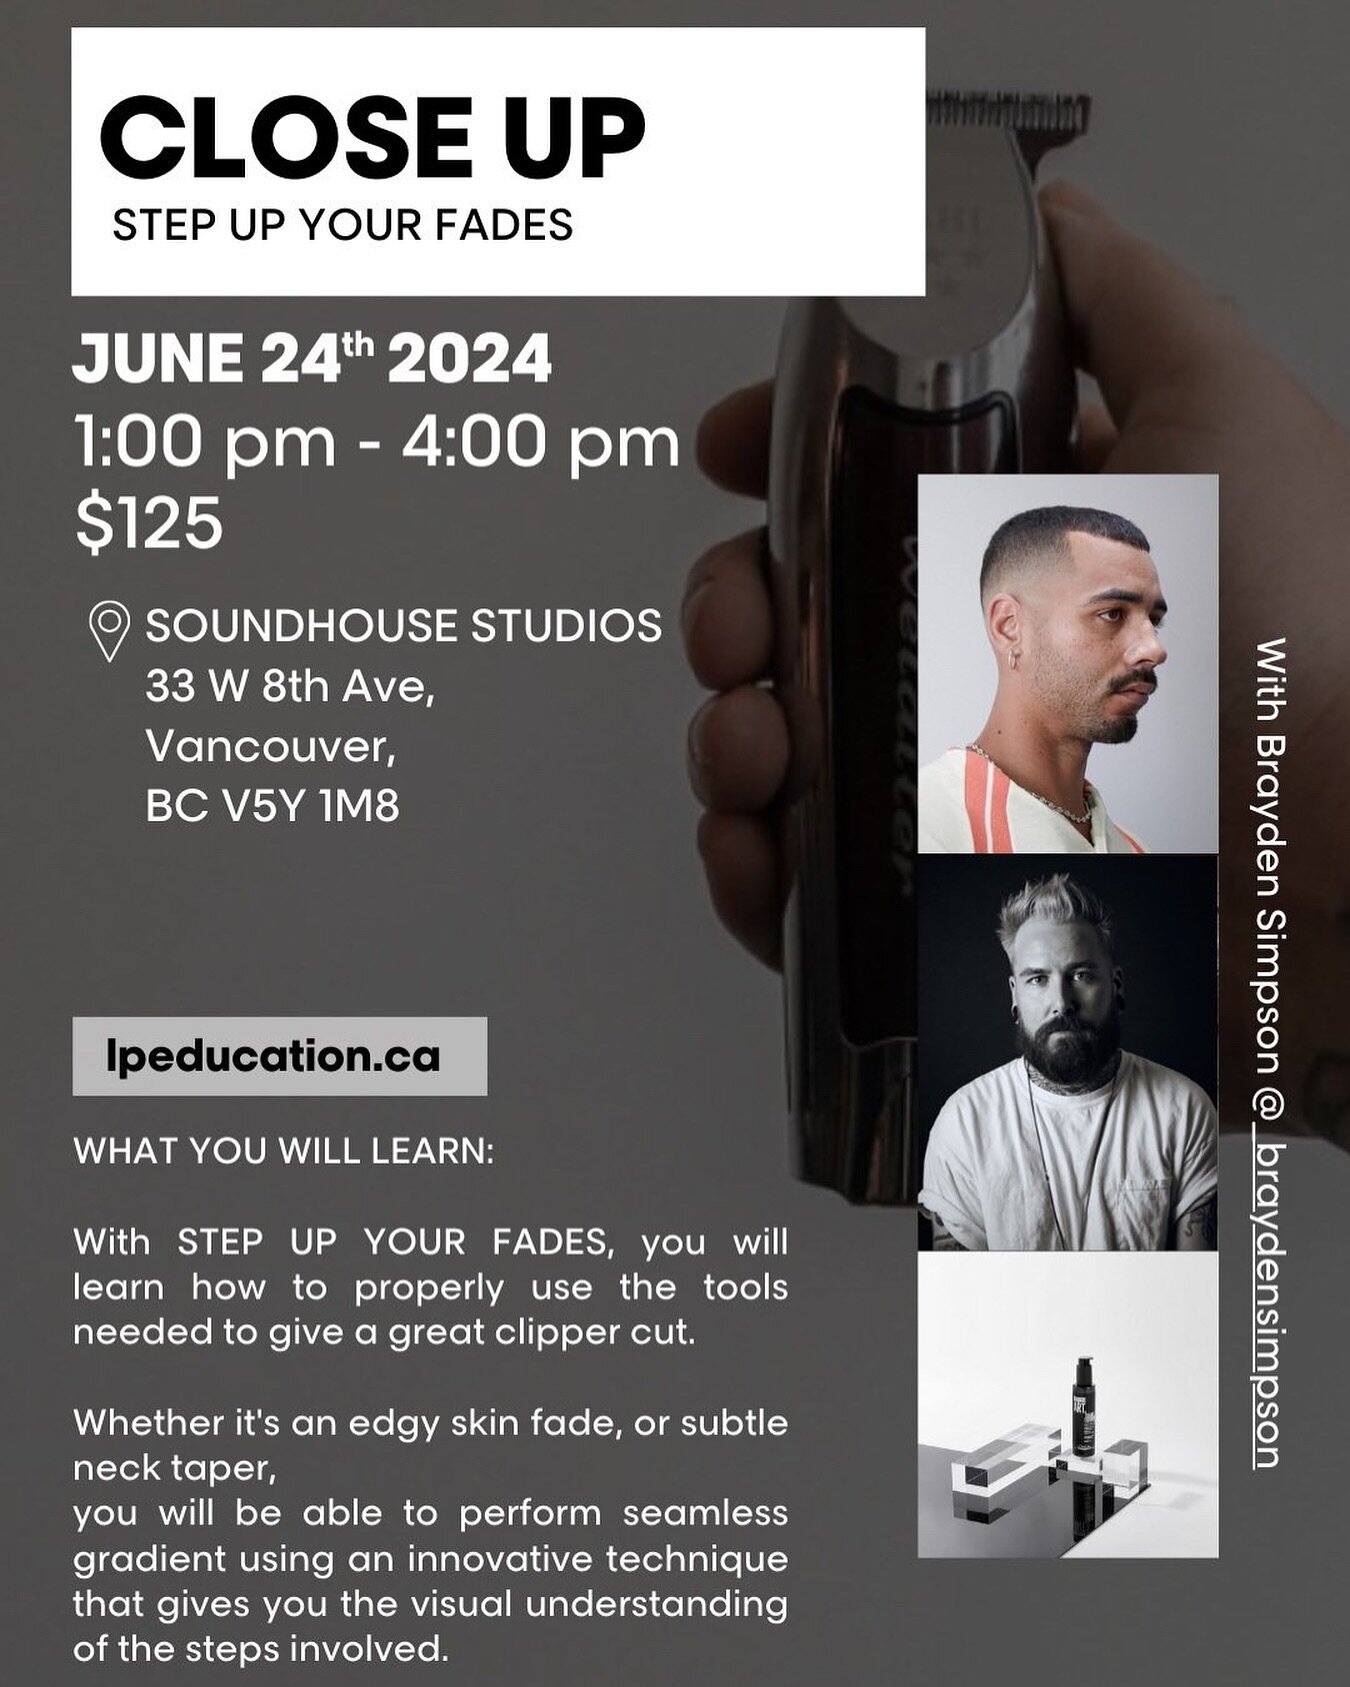 VANCOUVER! On June 24th I will be presenting a Close Up Masterclass hosted by @lorealpro_education_canada 

With STEP UP YOUR FADES, you will learn how to properly use the tools needed to give a great clipper cut.
Whether it&rsquo;s an edgy skin fade